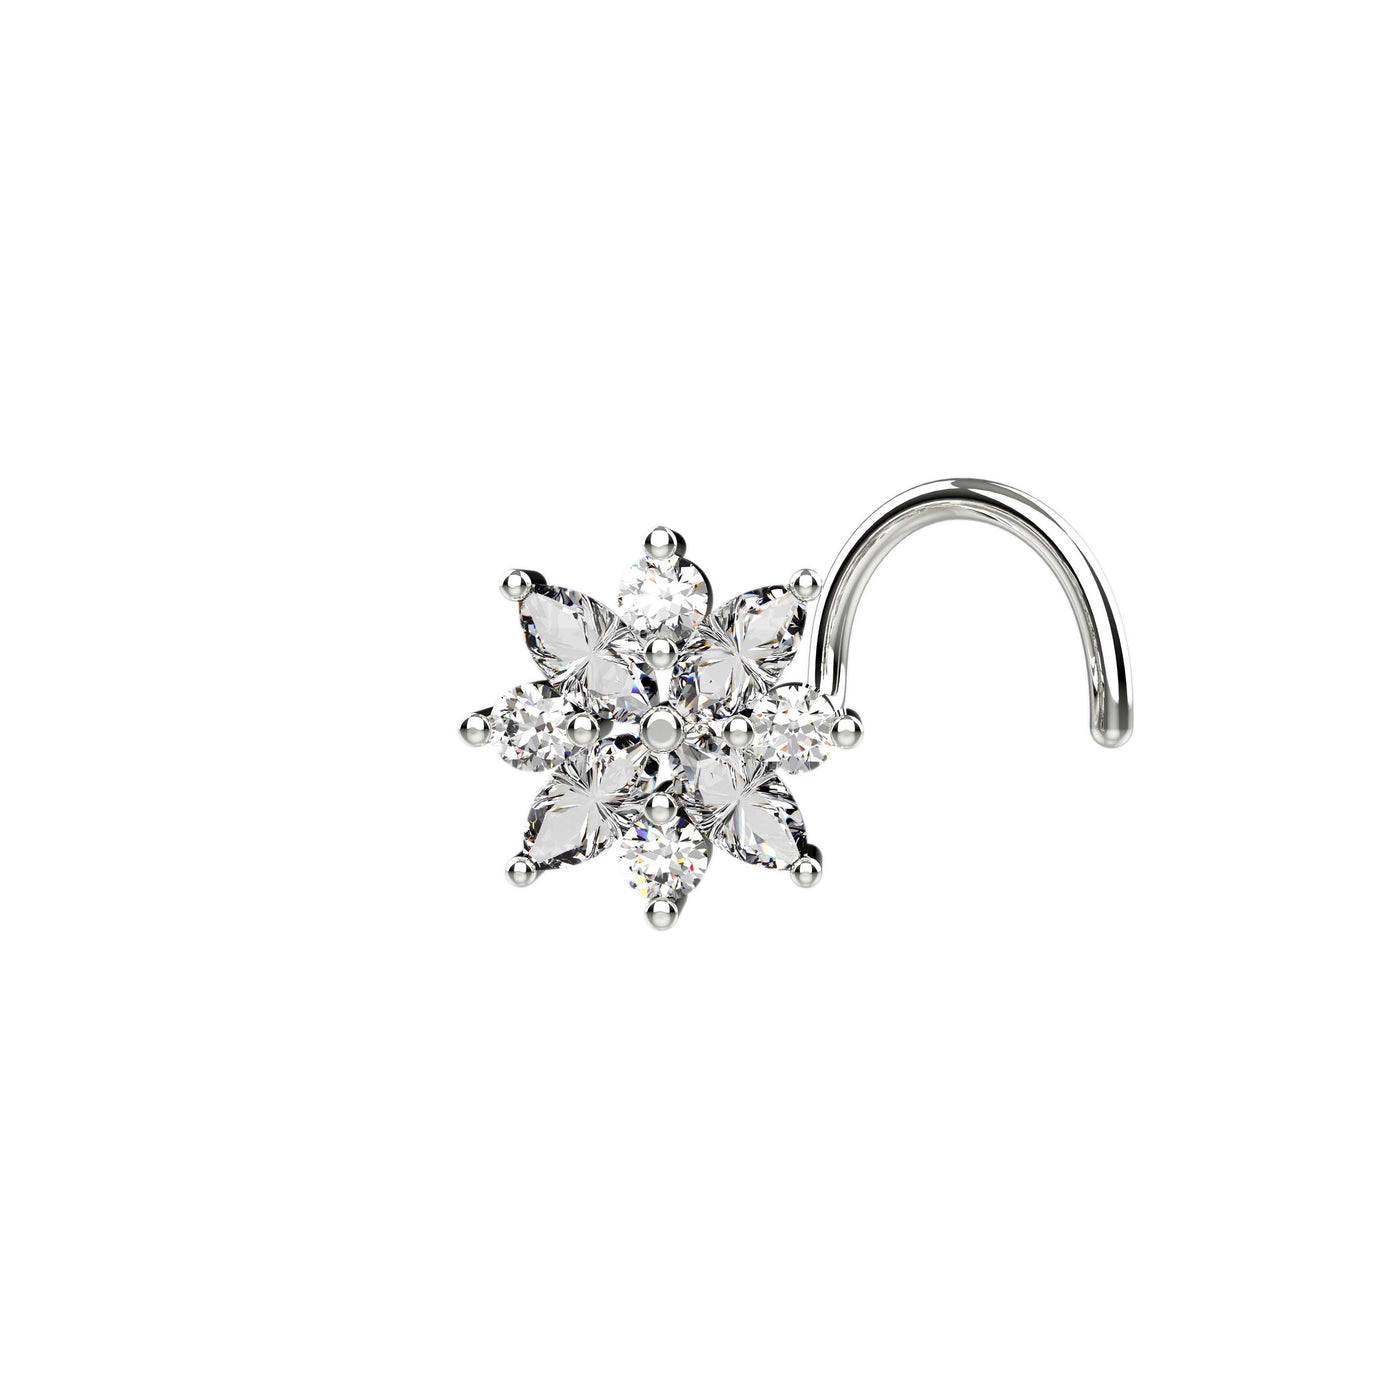 Dainty floral silver nose stud